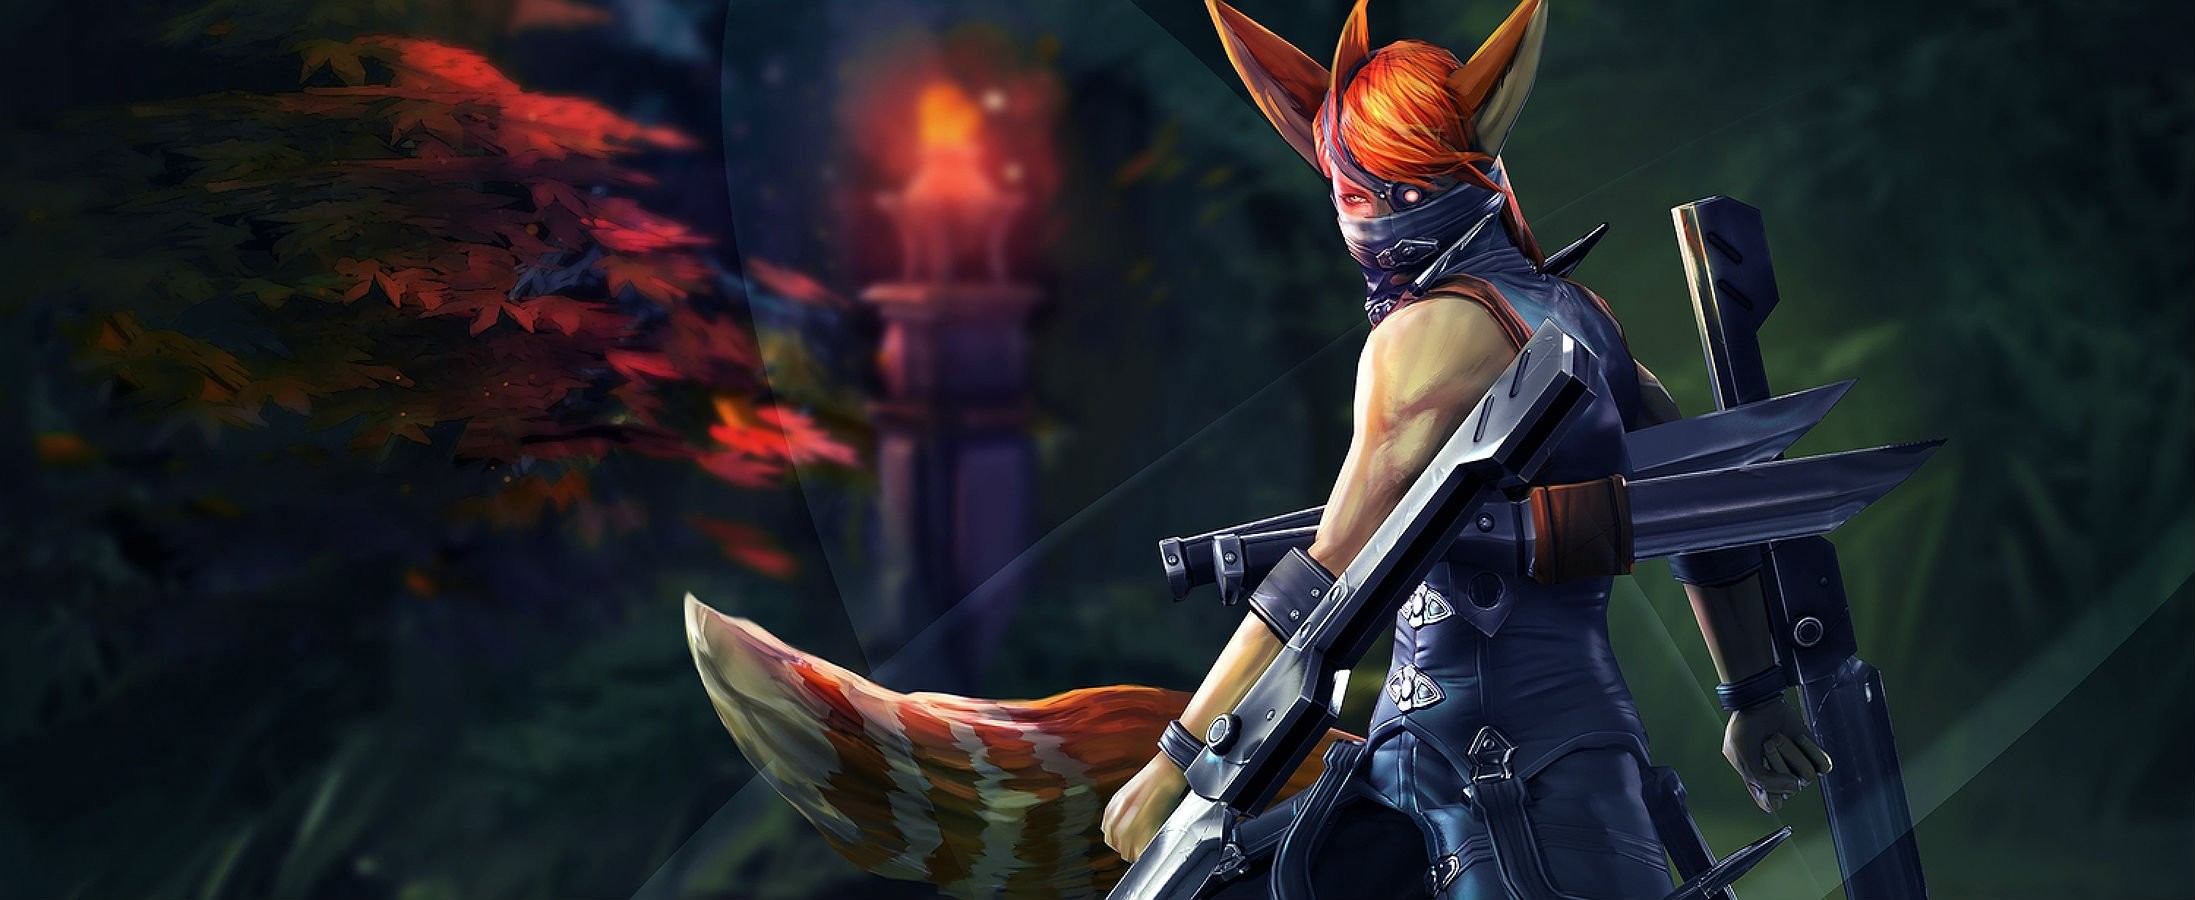 Fighting, Game Wallpapers, Free, Widescreen, Fantasyvainglory, - Taka Weapon , HD Wallpaper & Backgrounds